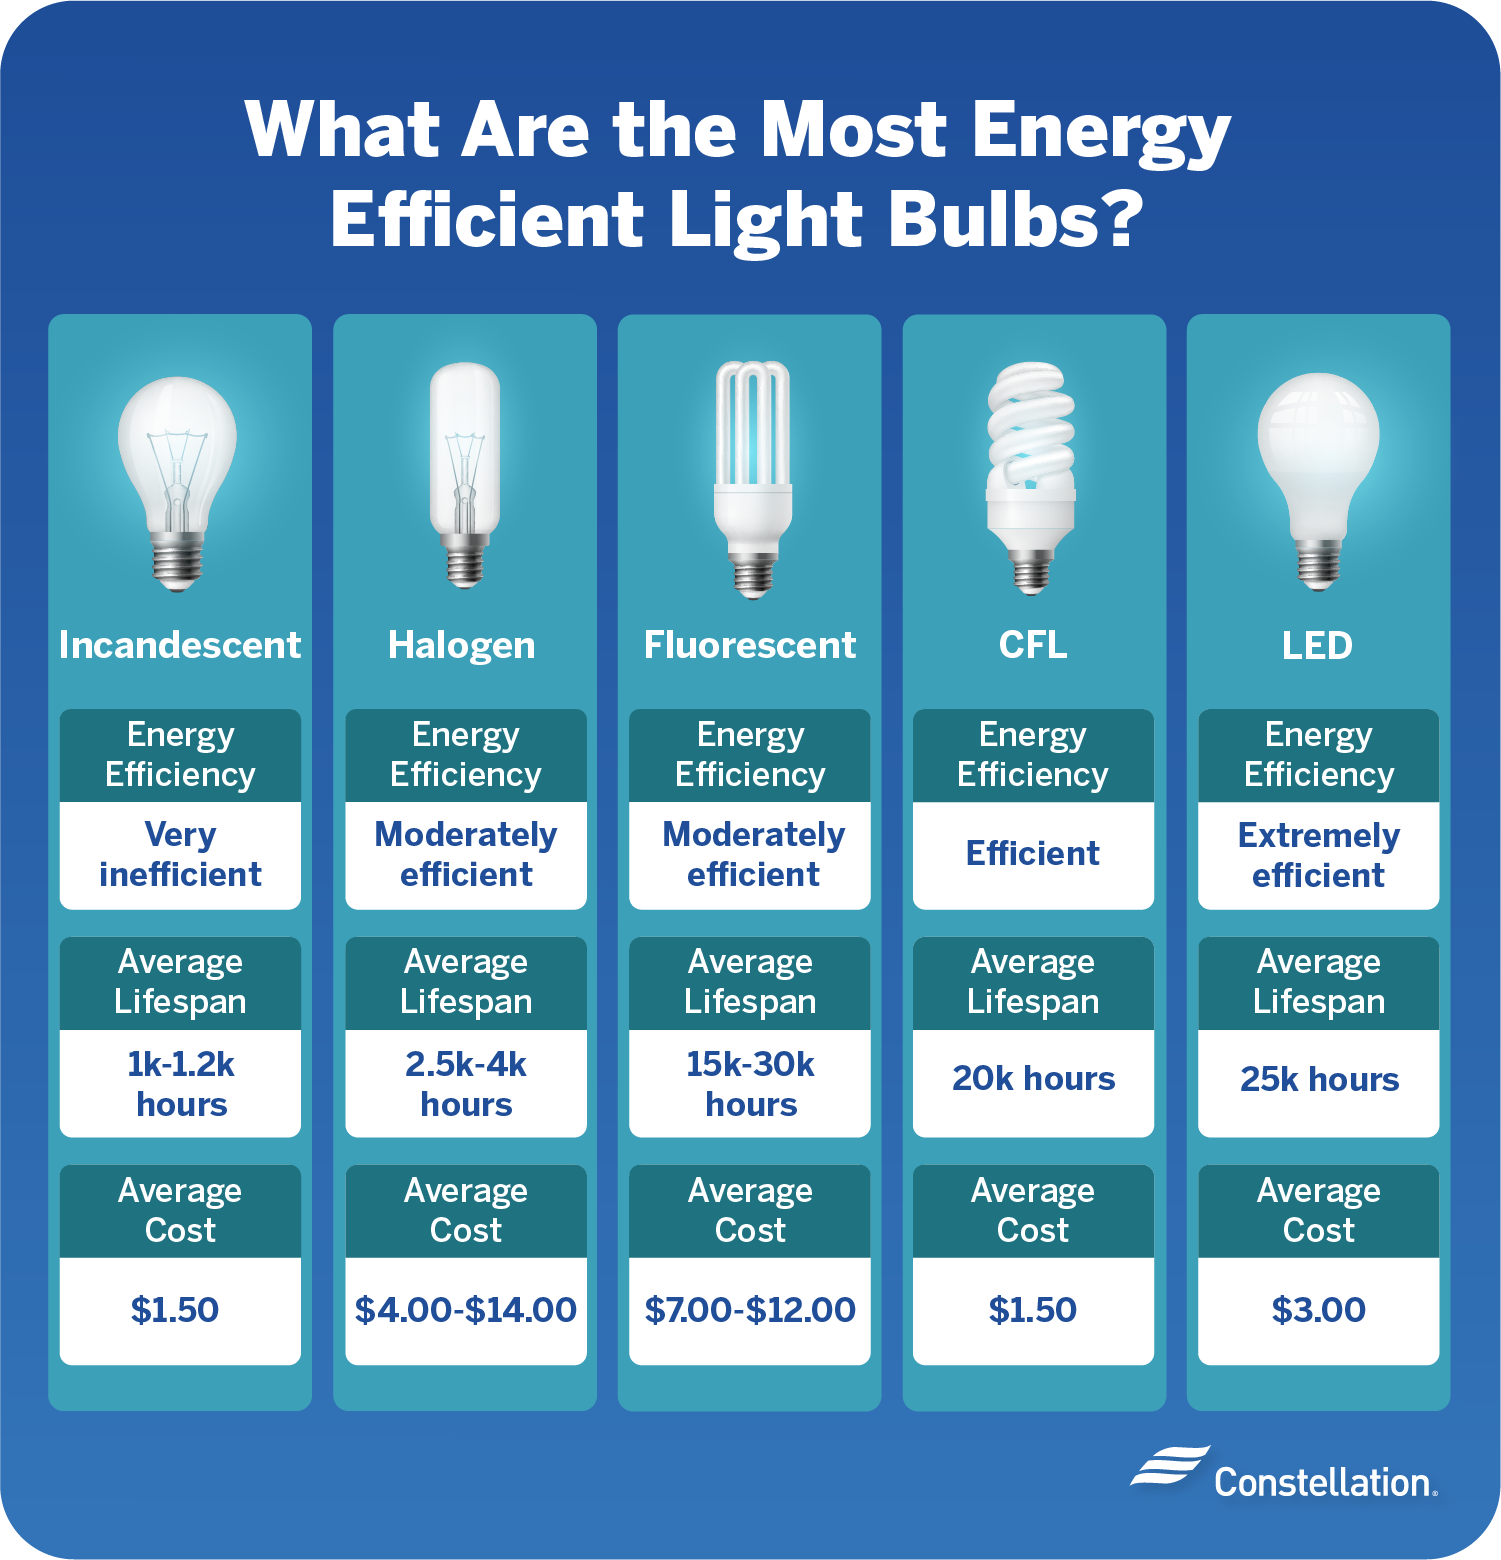 What are the most energy efficient light bulbs?